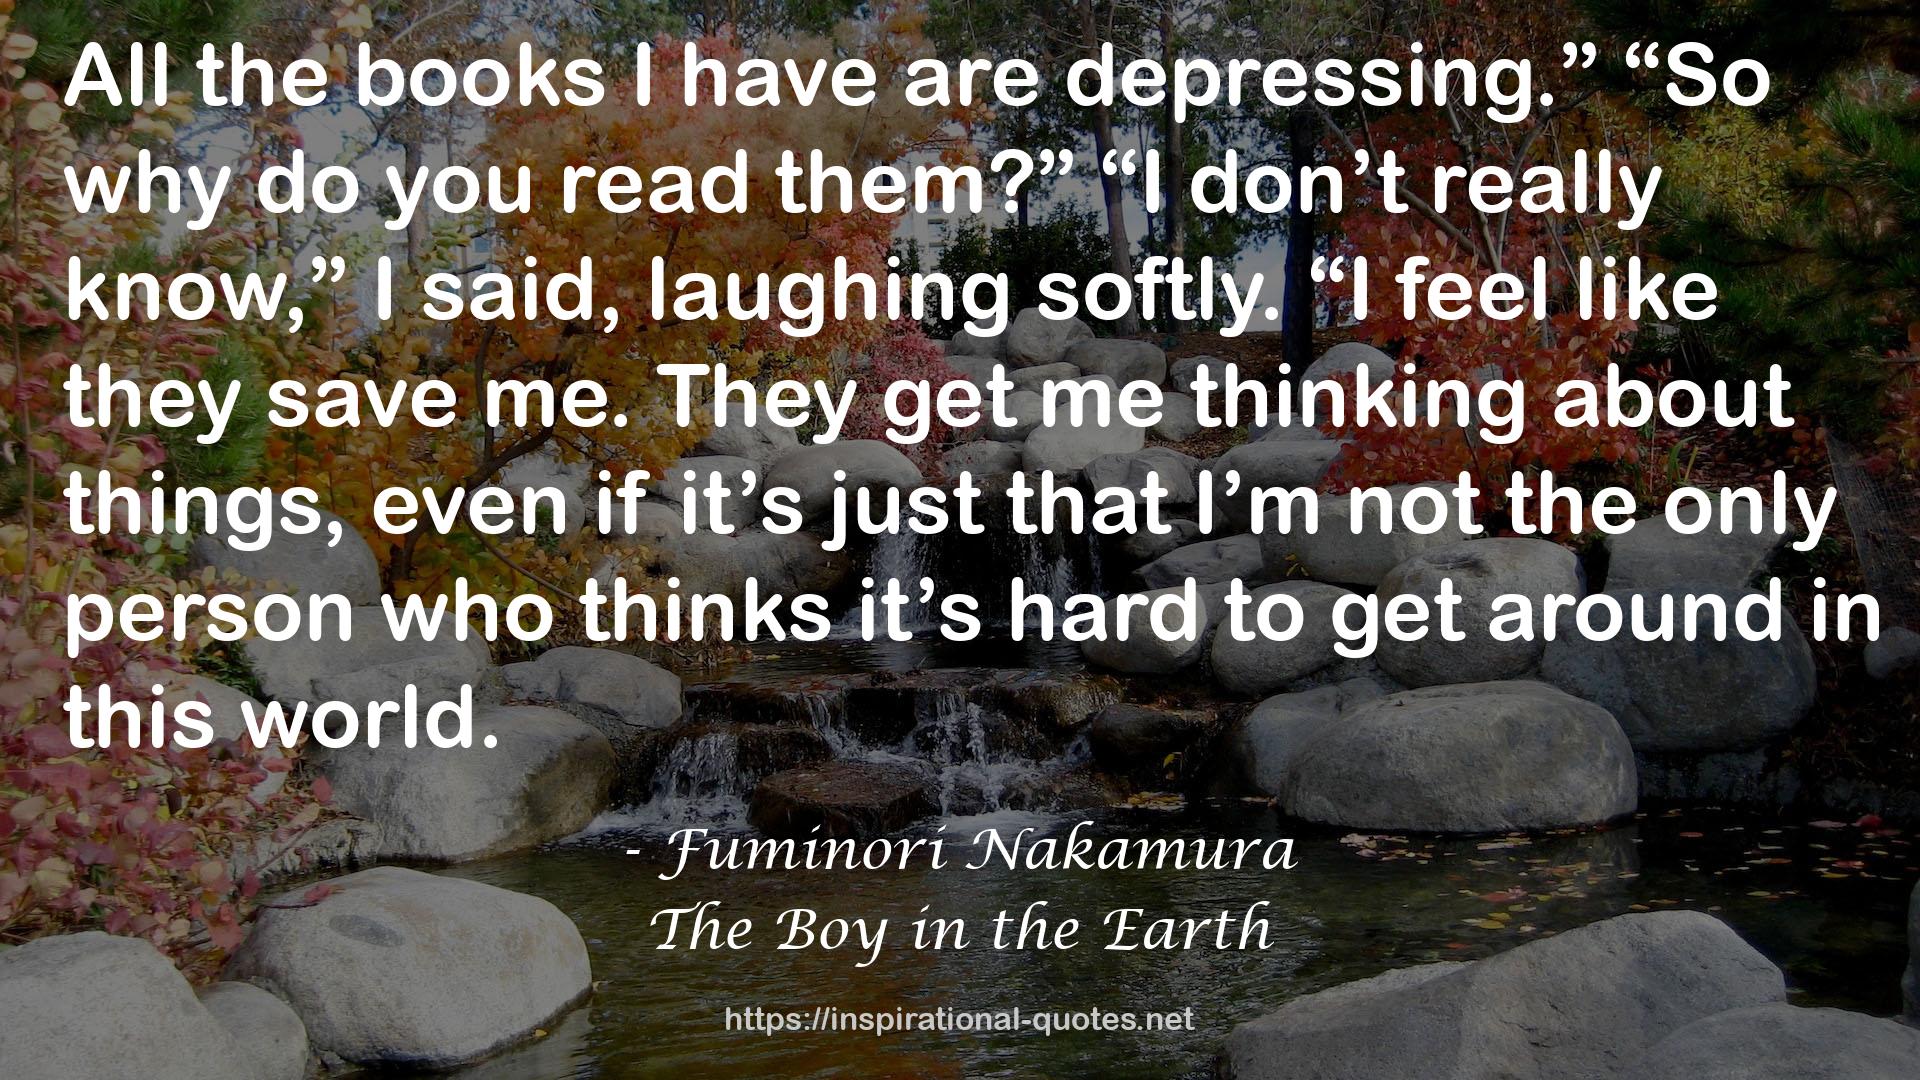 The Boy in the Earth QUOTES